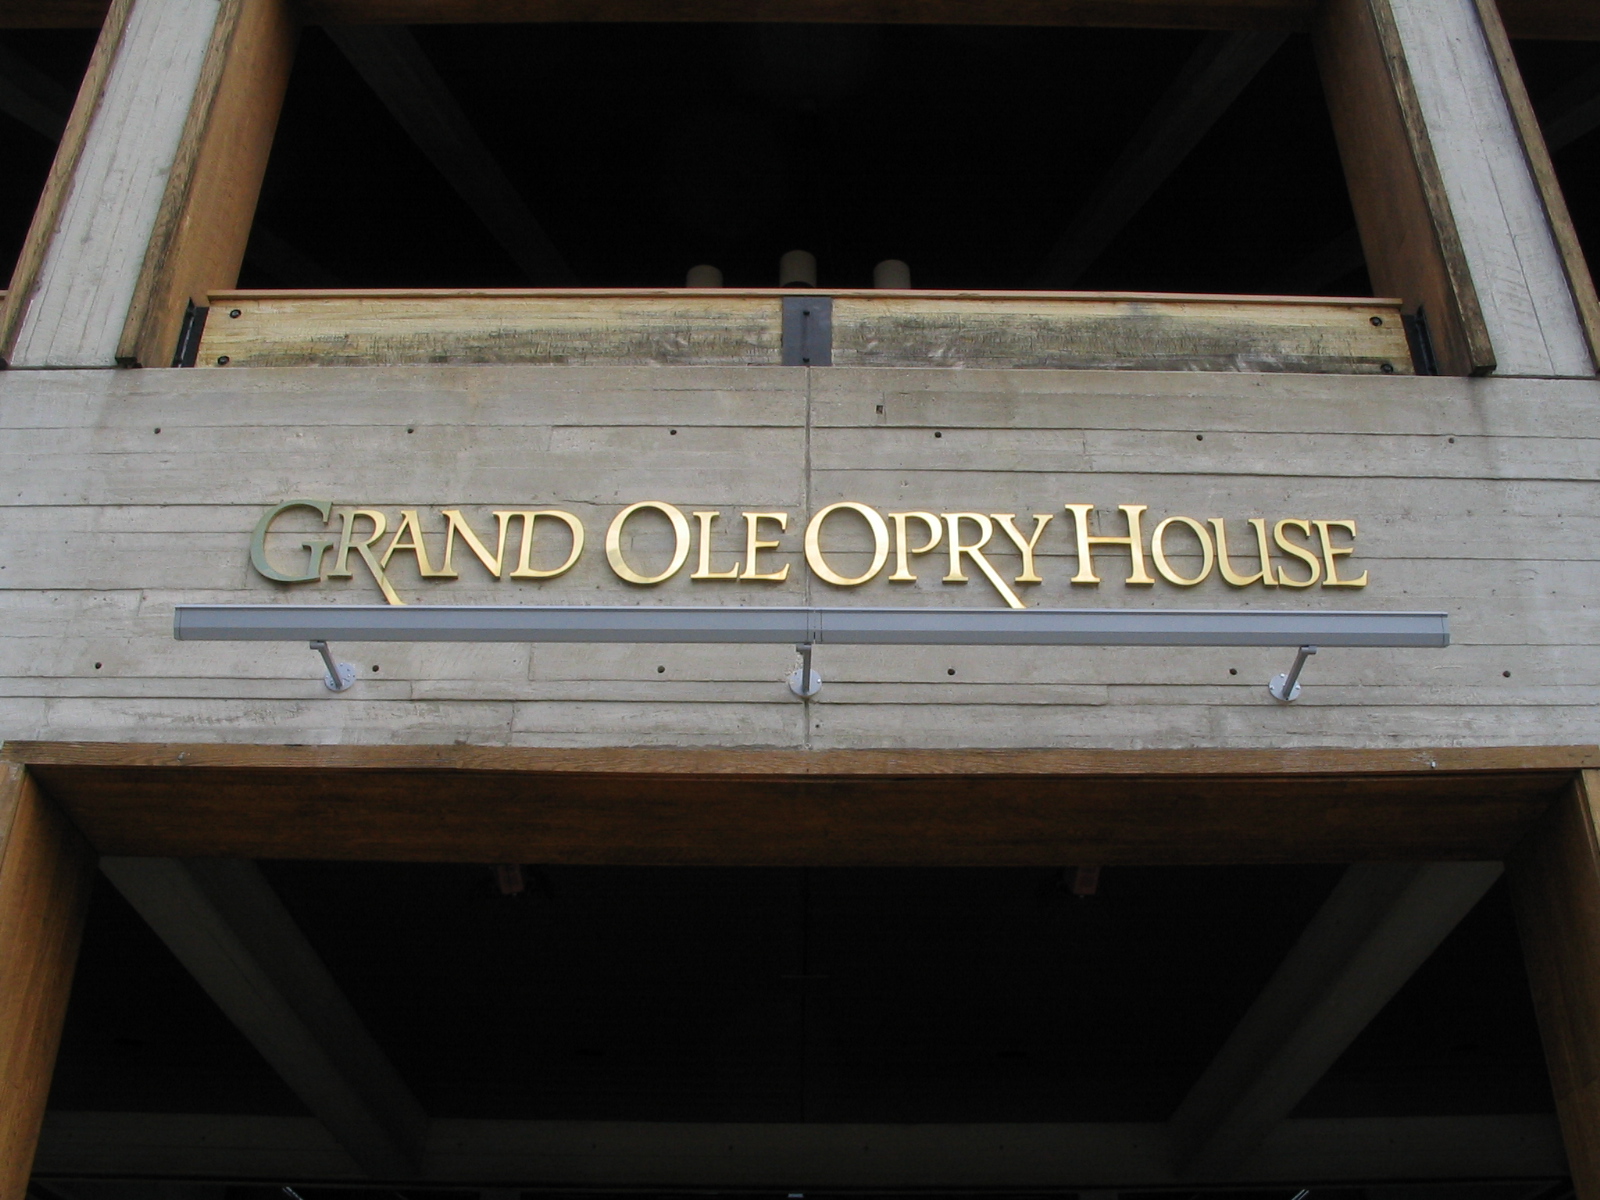 Sign declaring, "Grrand Ole Opry House."